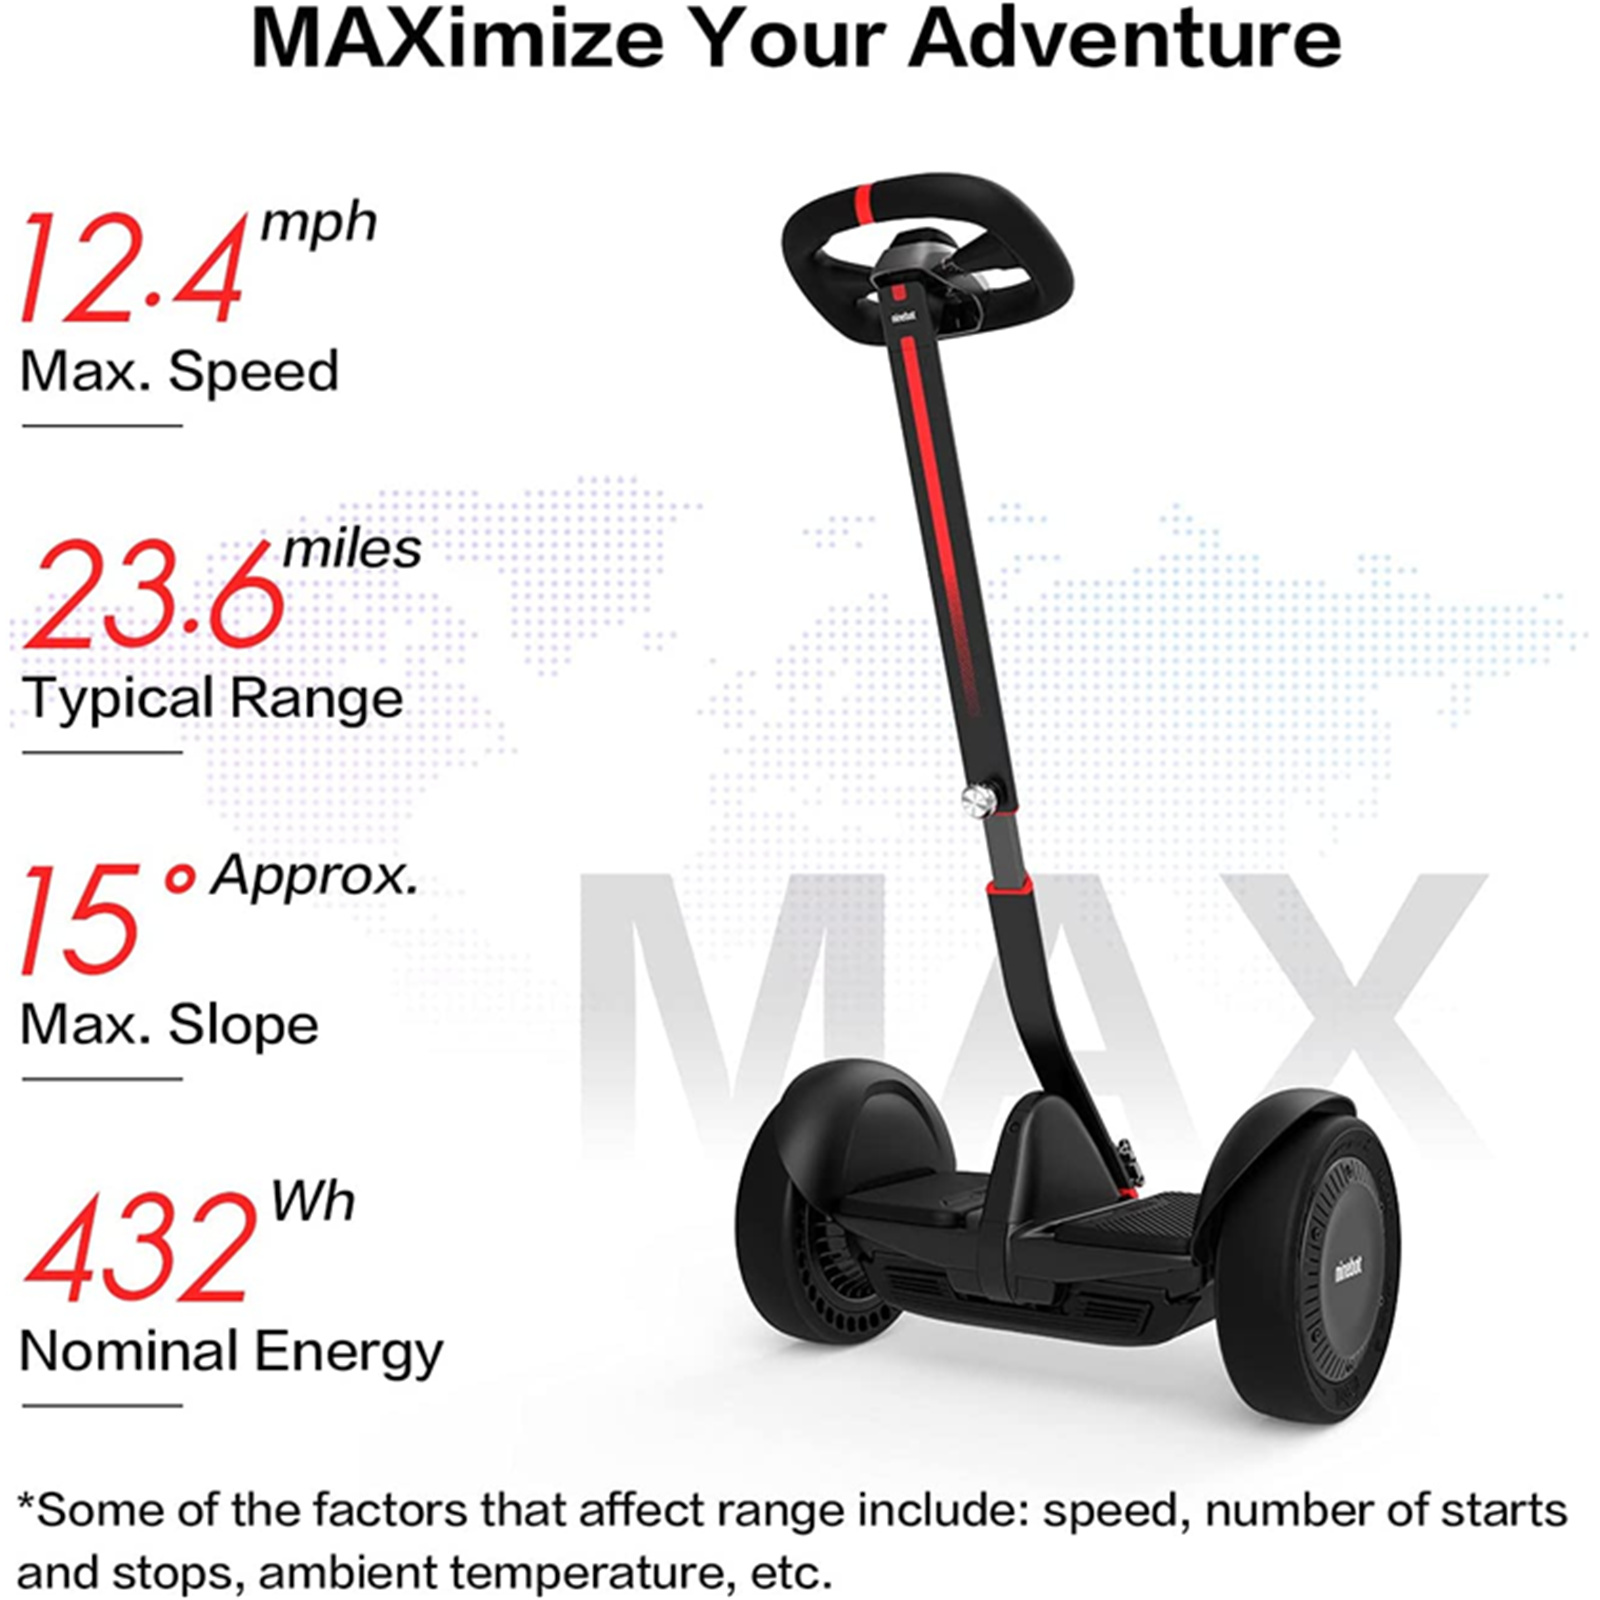 Buy the Segway Ninebot Max Electric Car Self-Balancing, Steering... ( AA.00.0011.17 ) online PBTech.com/pacific